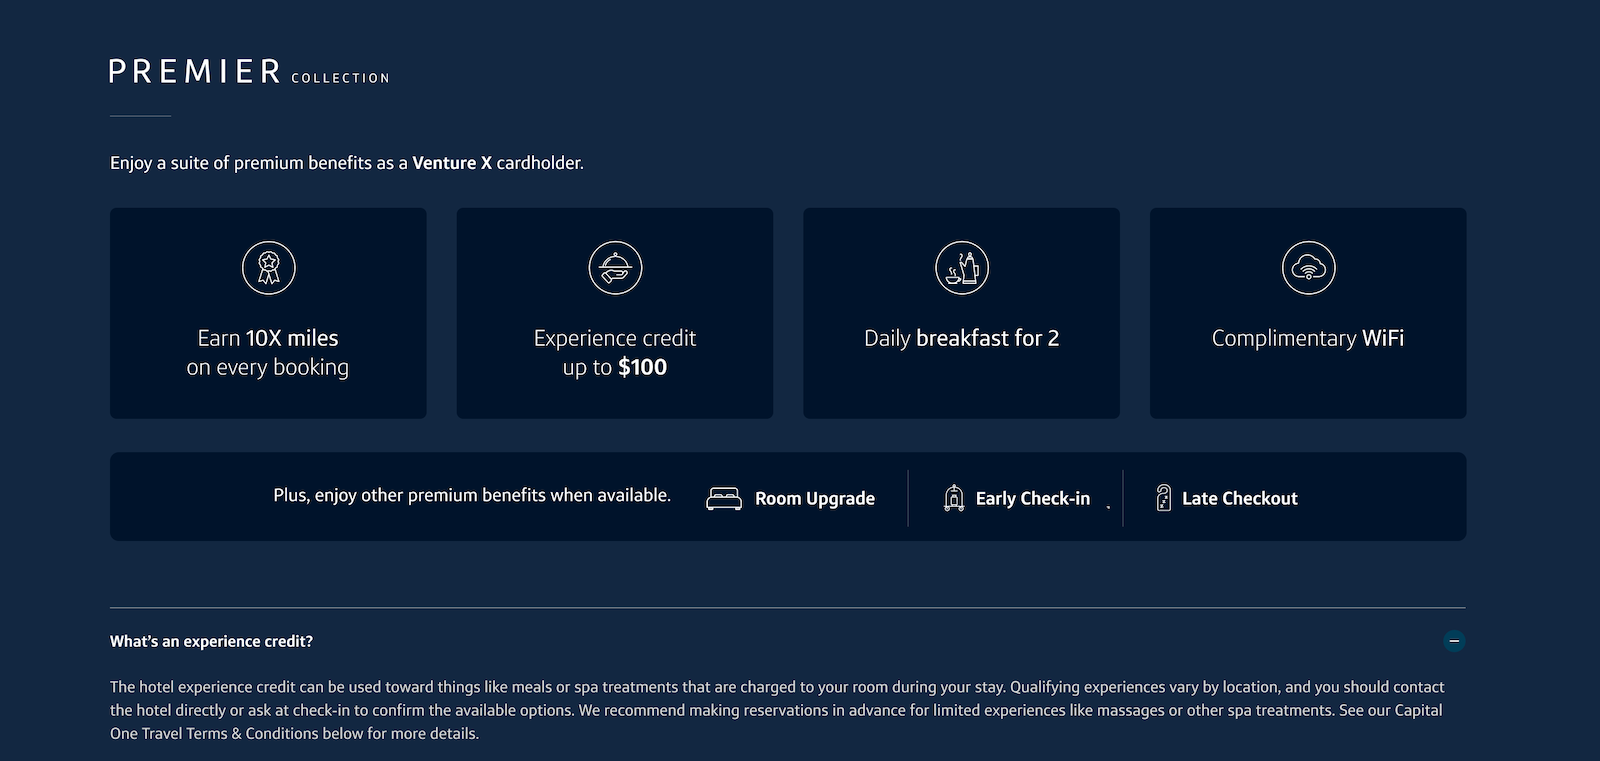 You are currently viewing Capital One Premier Collection now live: Get free breakfast, experience credits and room upgrades on hotel bookings